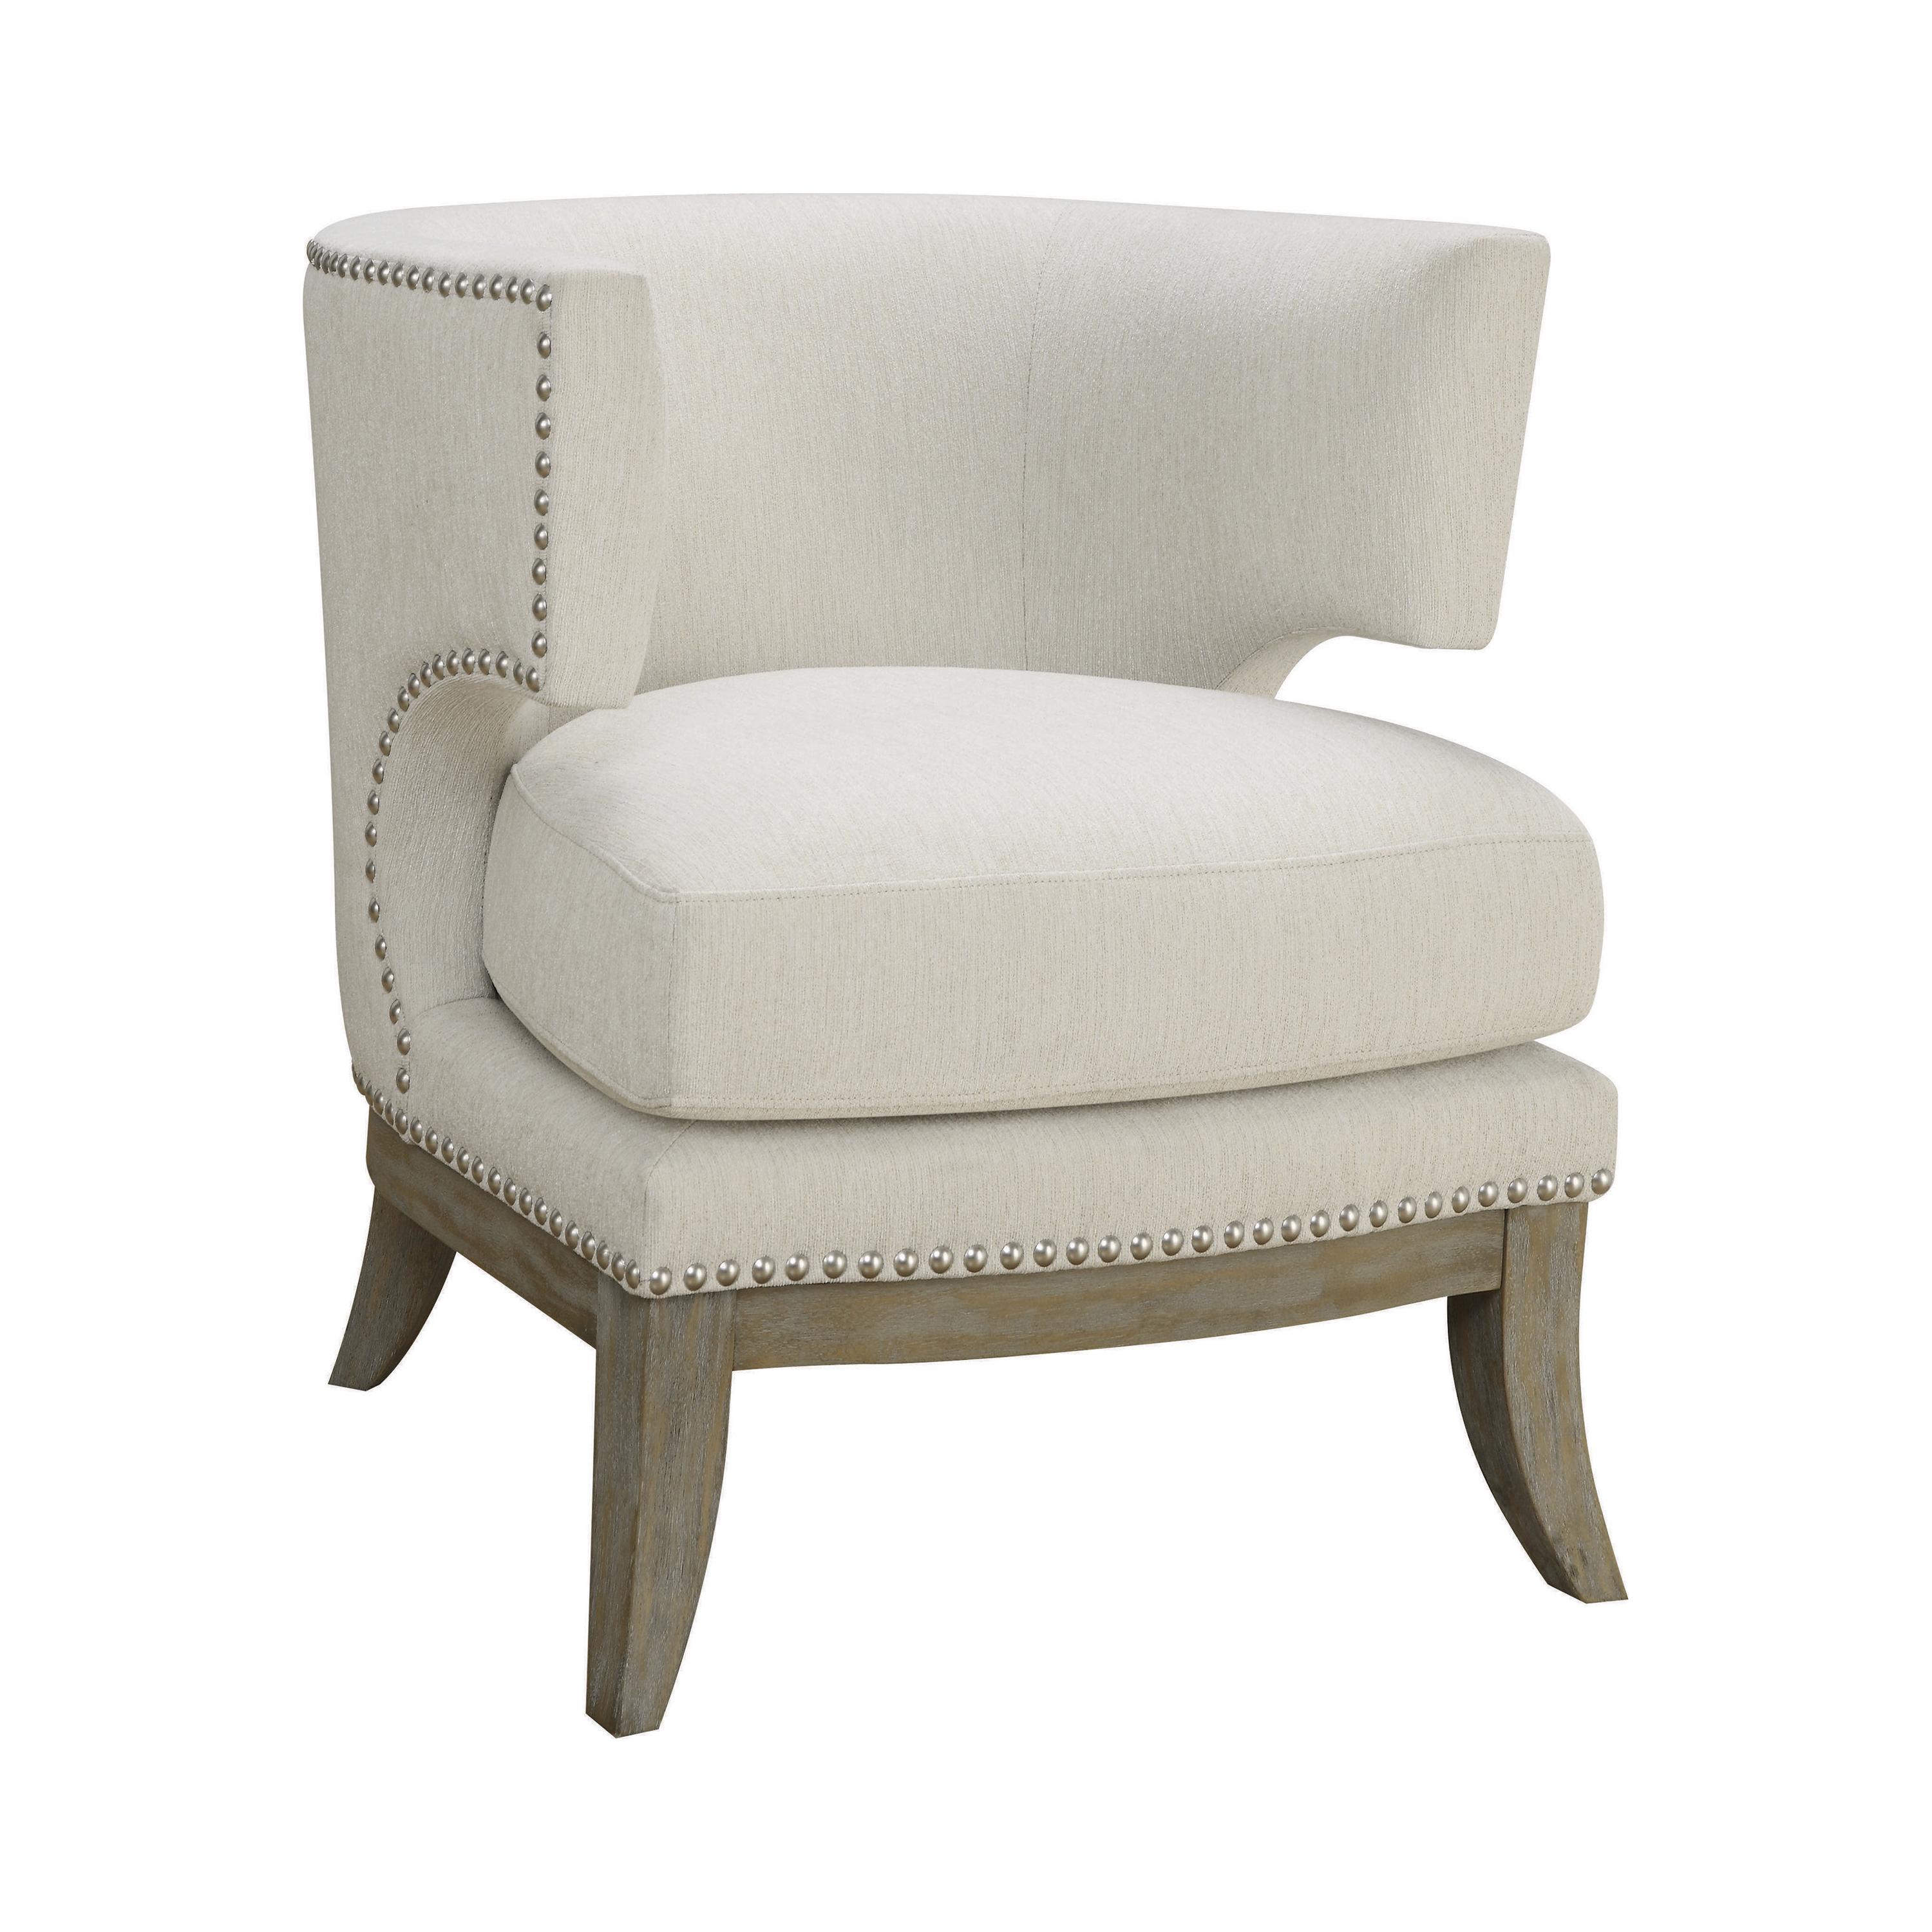 Contemporary Accent Chair 902559 902559 in White Chenille